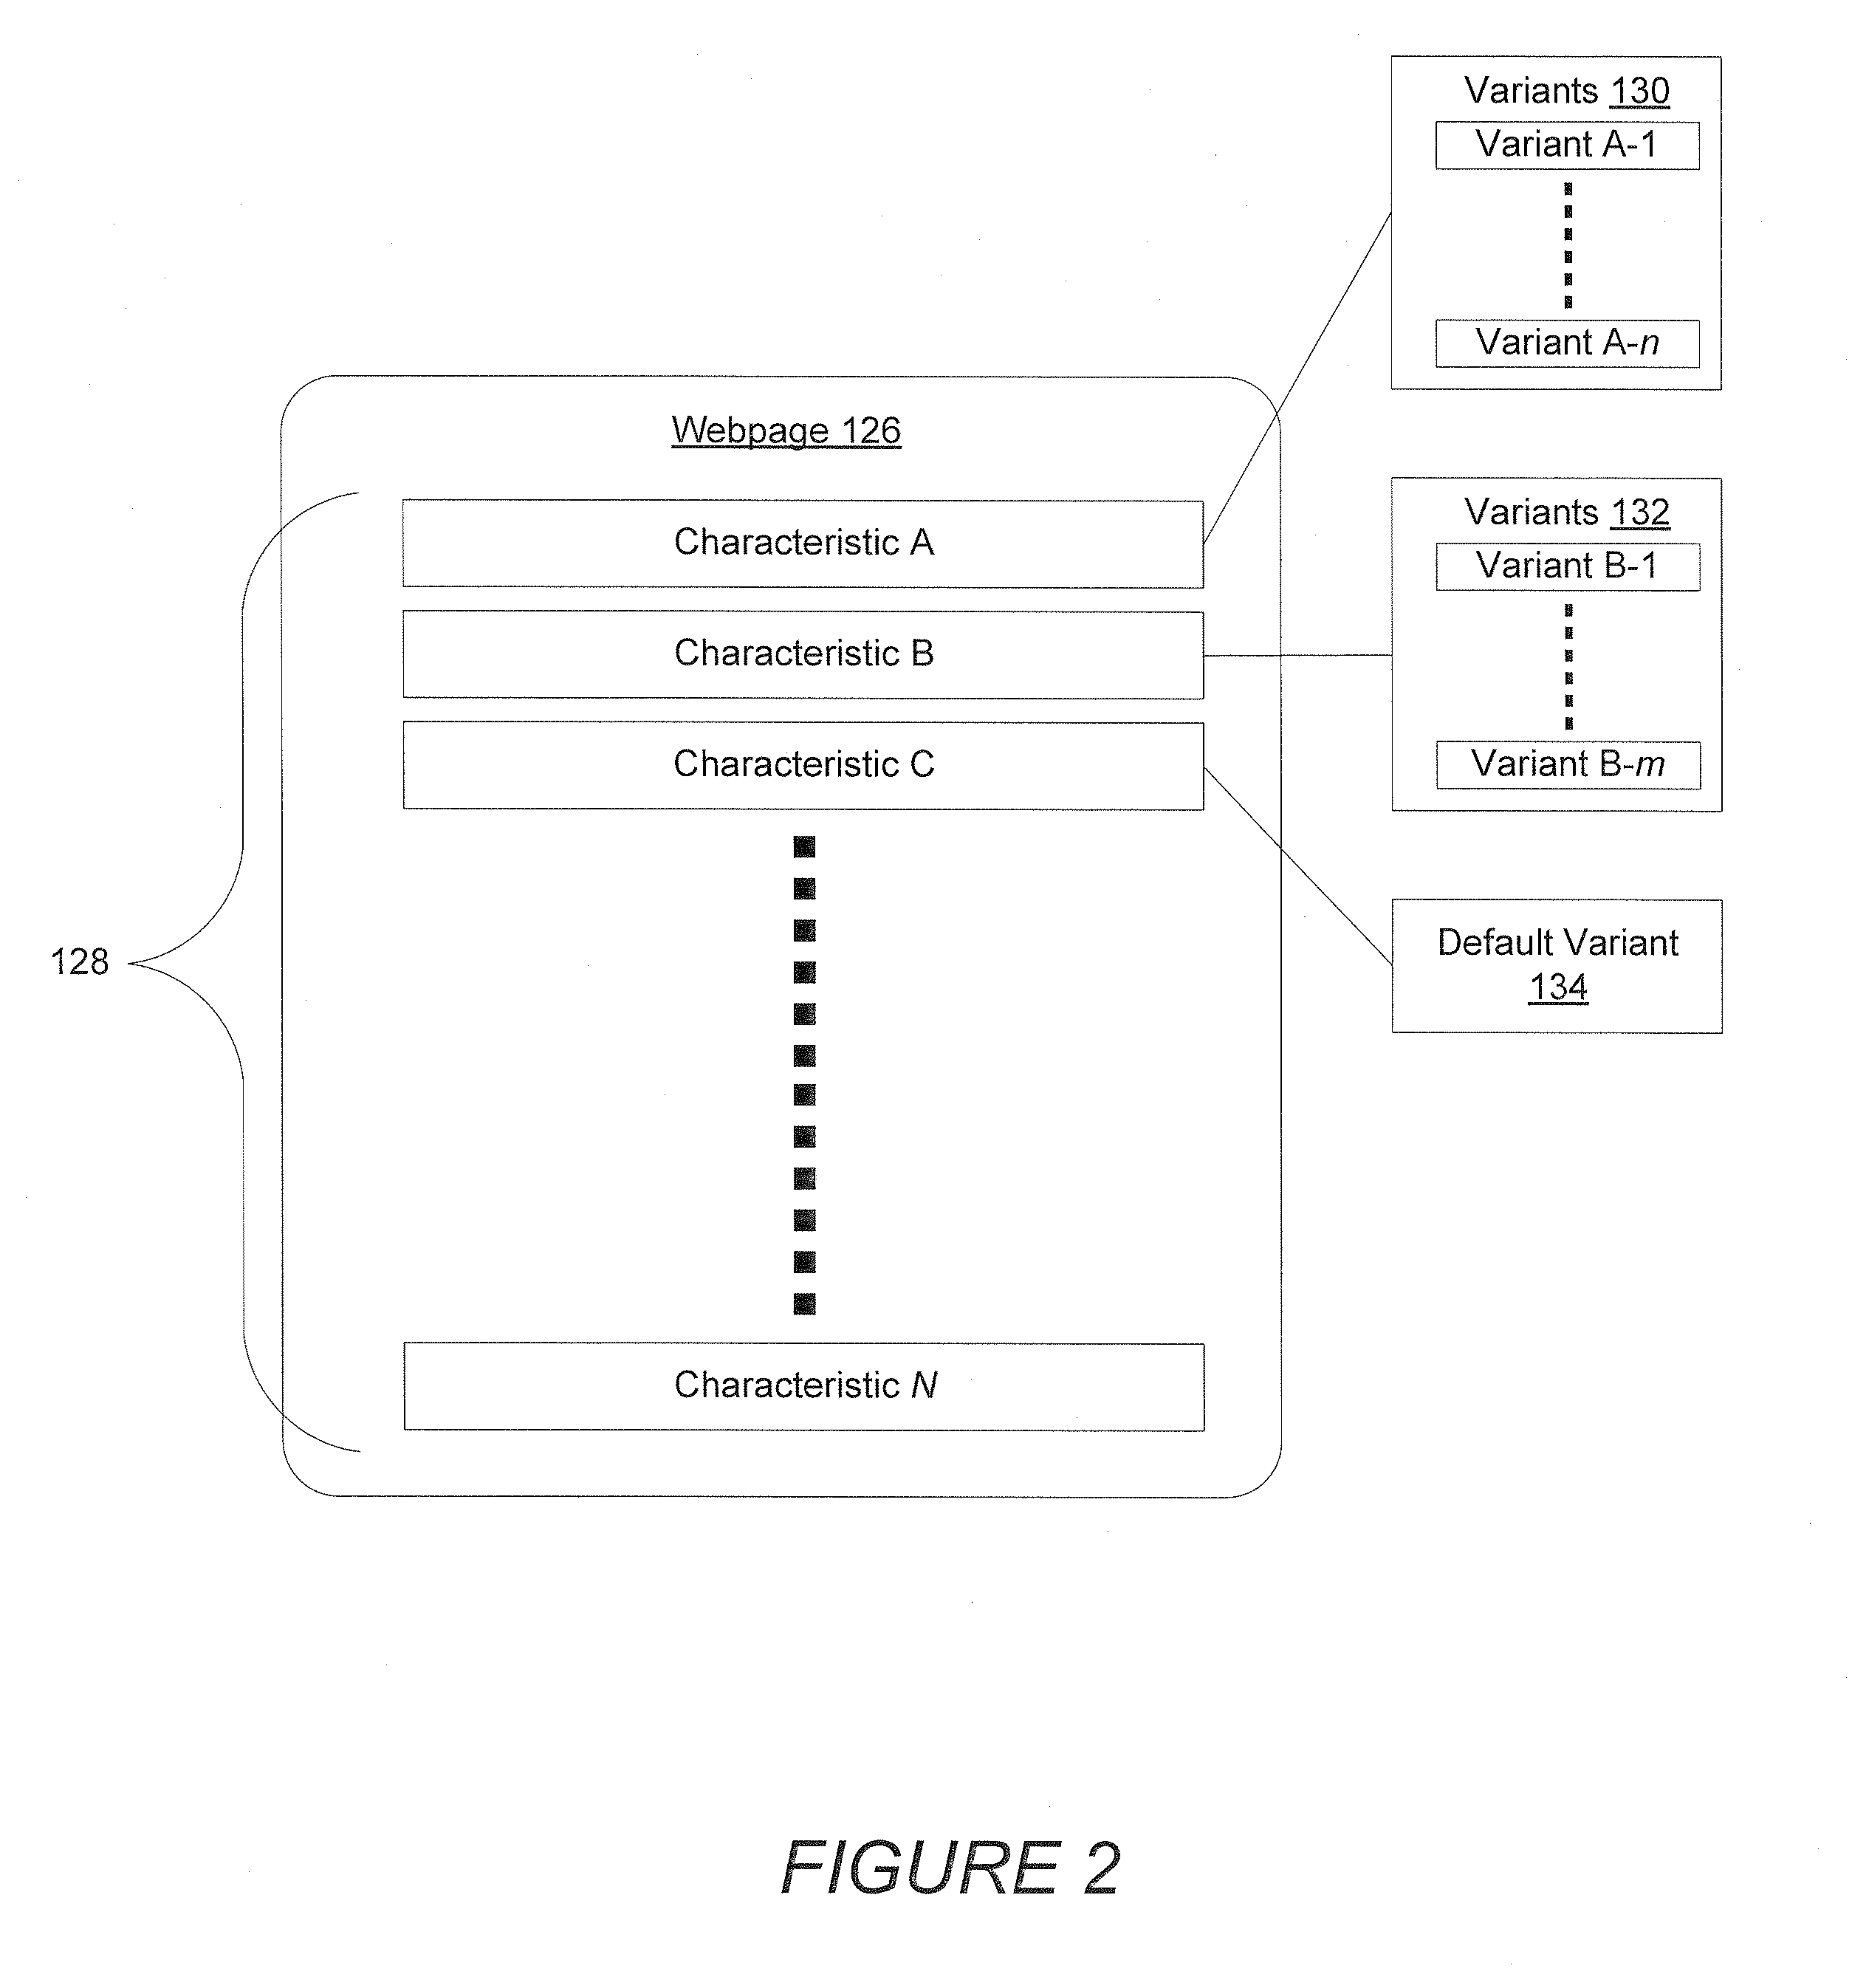 System and method for assigning computer users to test groups